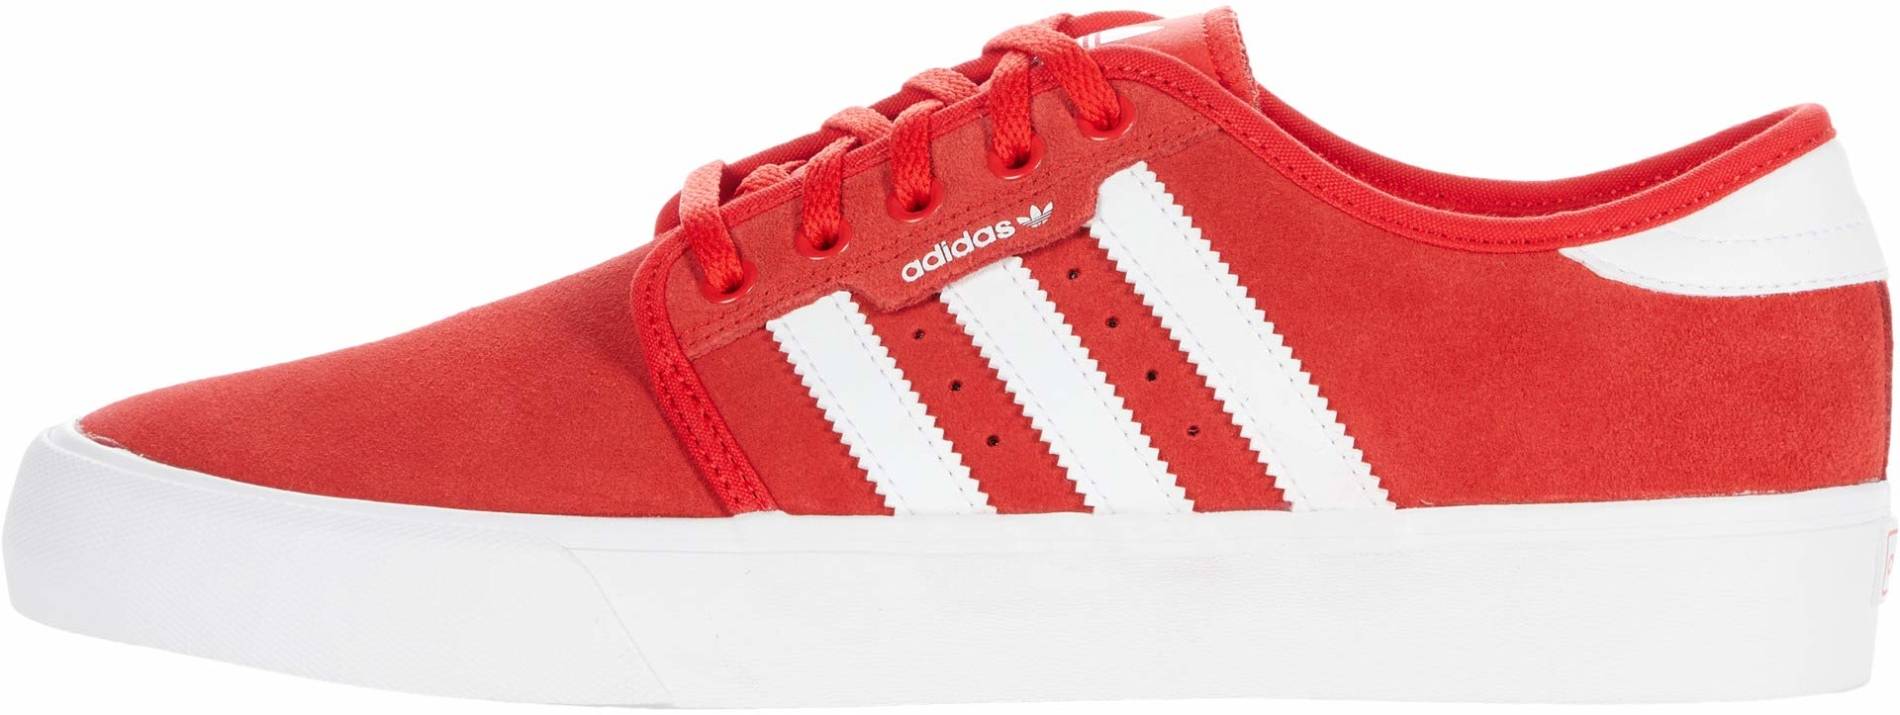 Adidas Seeley XT sneakers in red + 